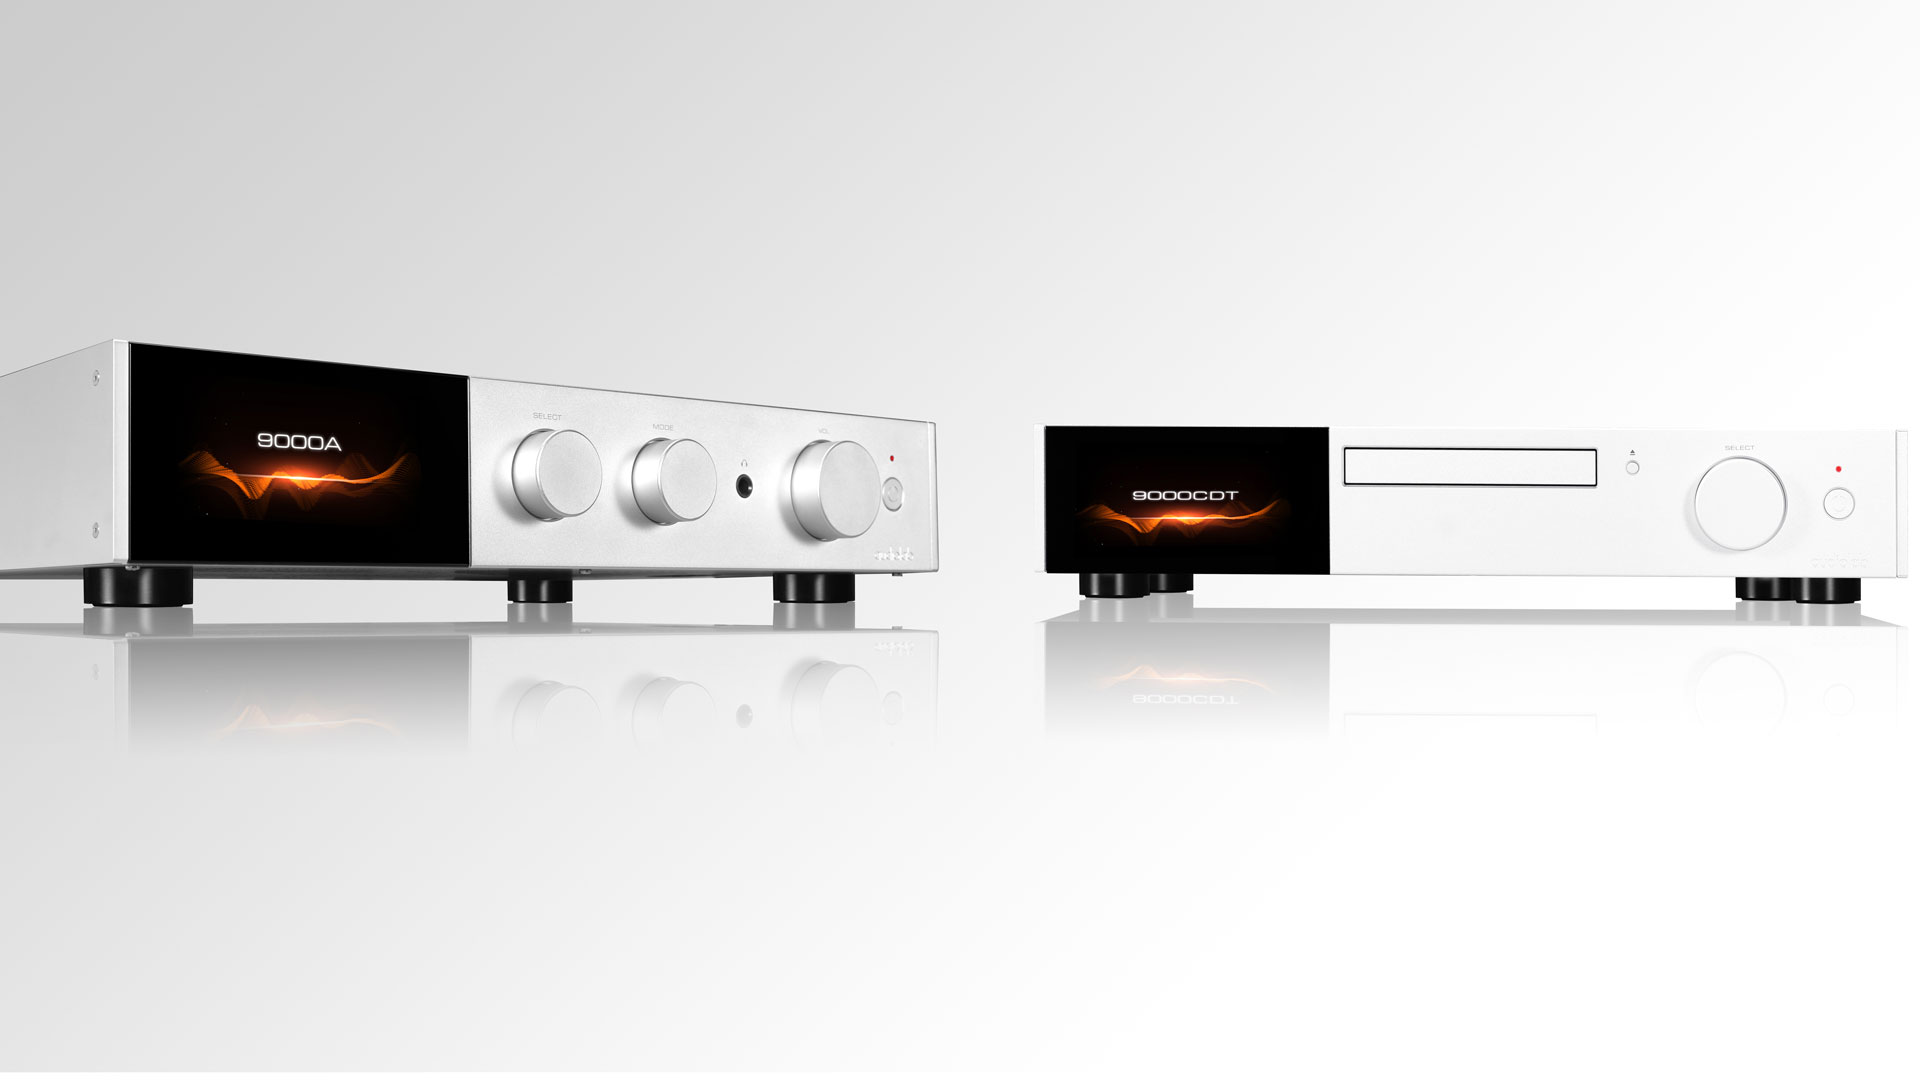 The new Audiolab 9000A and 9000CDT (Image Credit: Audiolab)